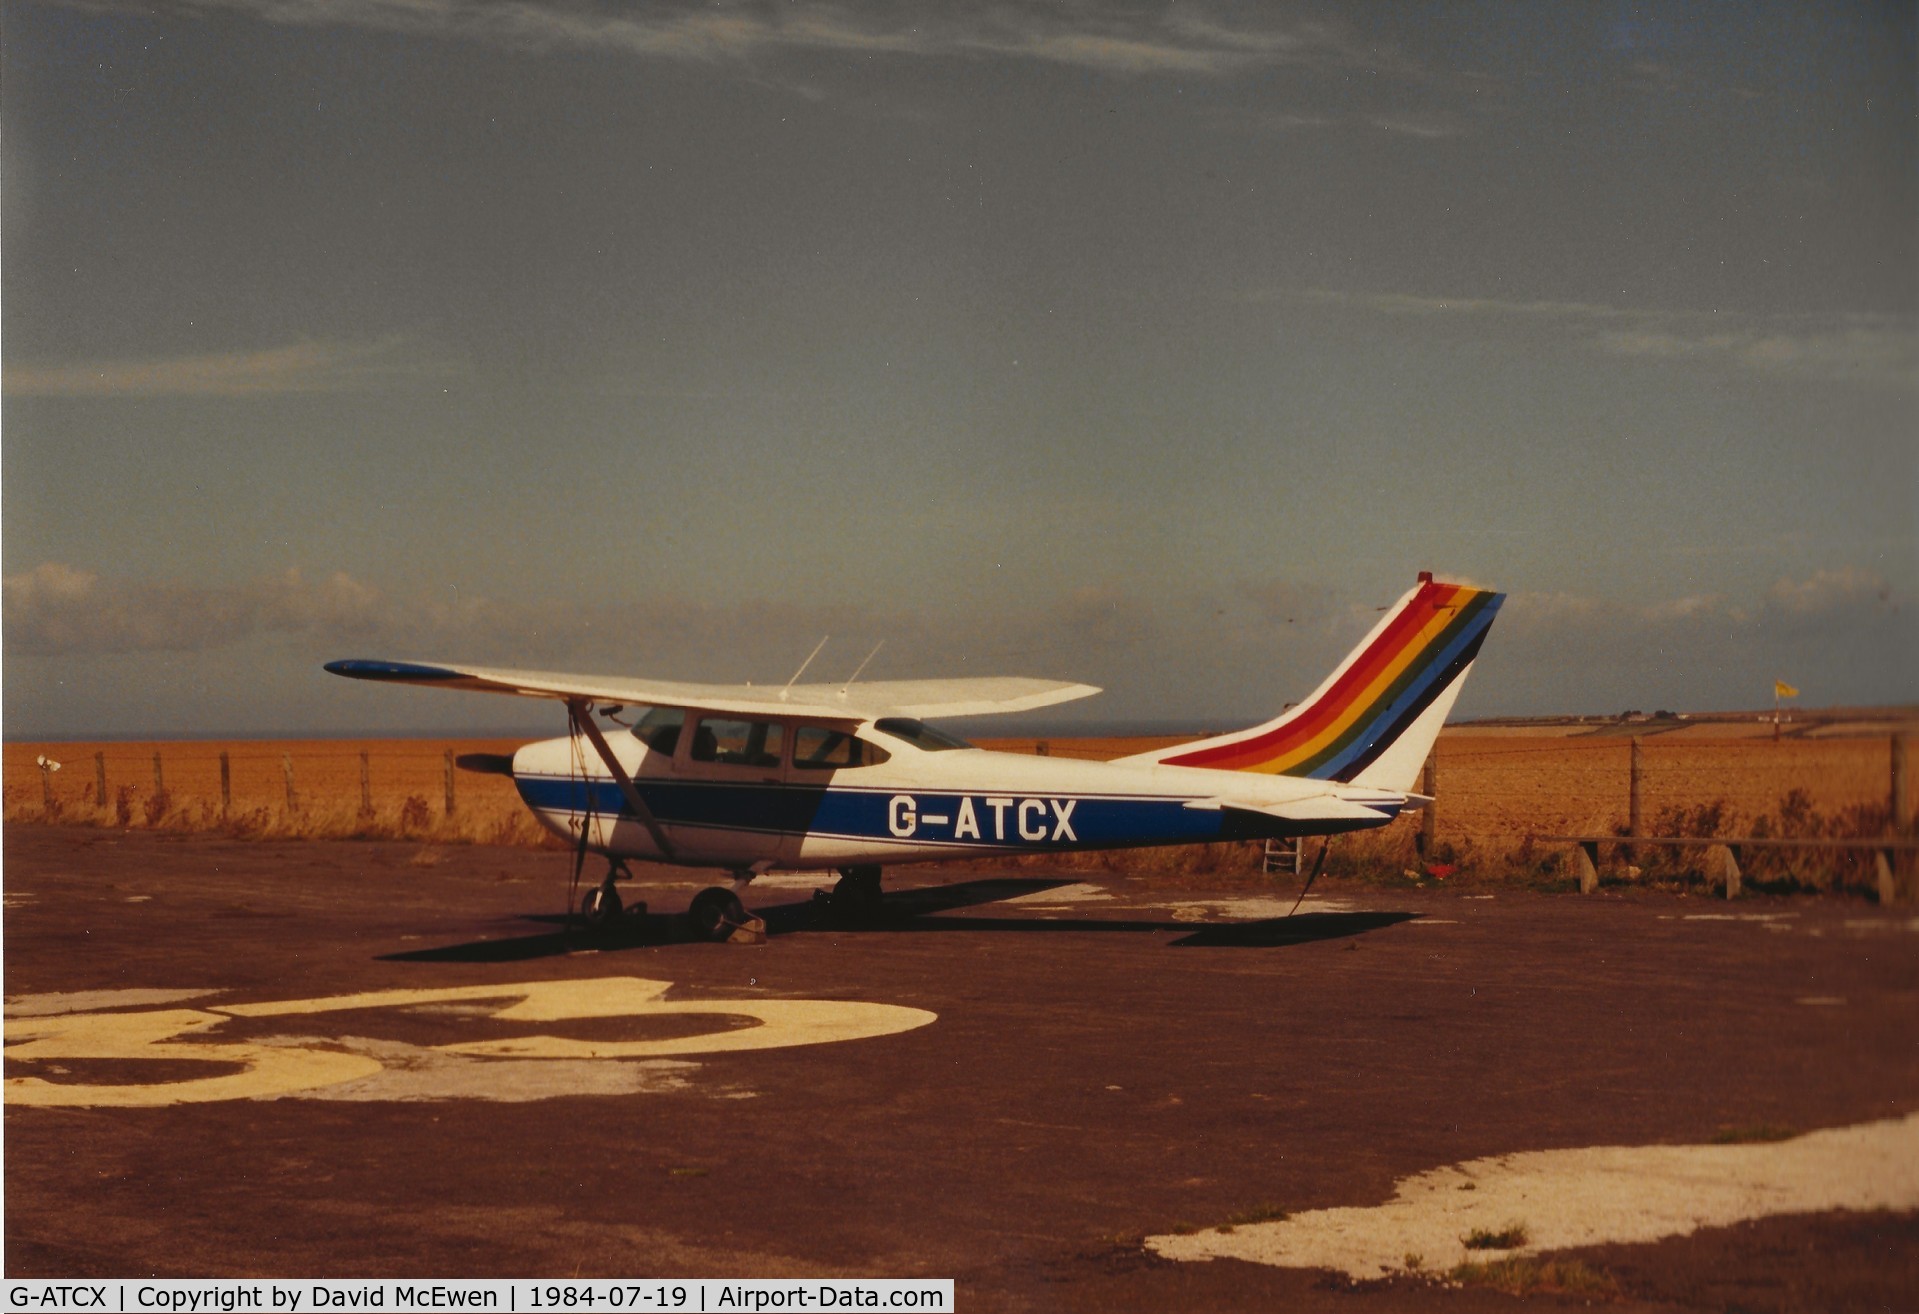 G-ATCX, 1964 Cessna 182H Skylane C/N 182-55848, G-ATCX : Cessna 182H used for parachute training at St Merryn Airfield, Cornwall. July 1984